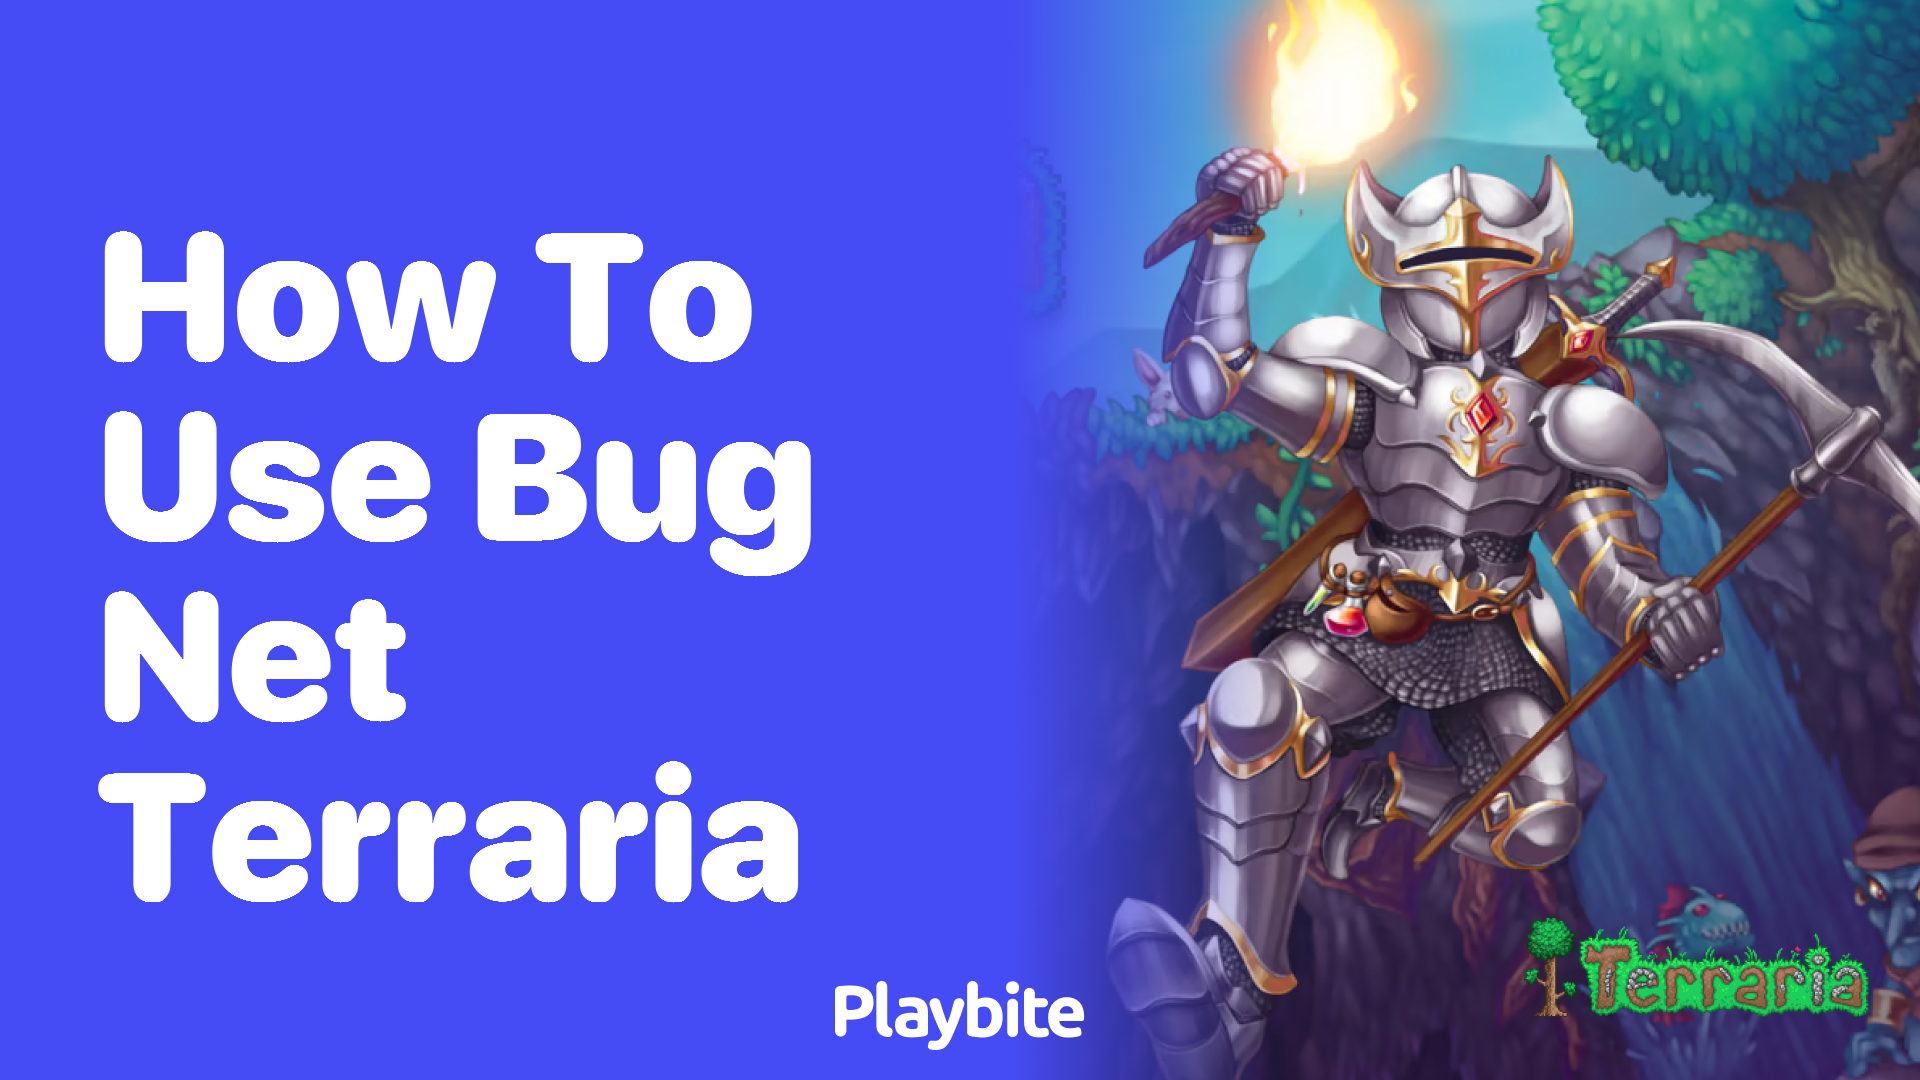 How to use the Bug Net in Terraria